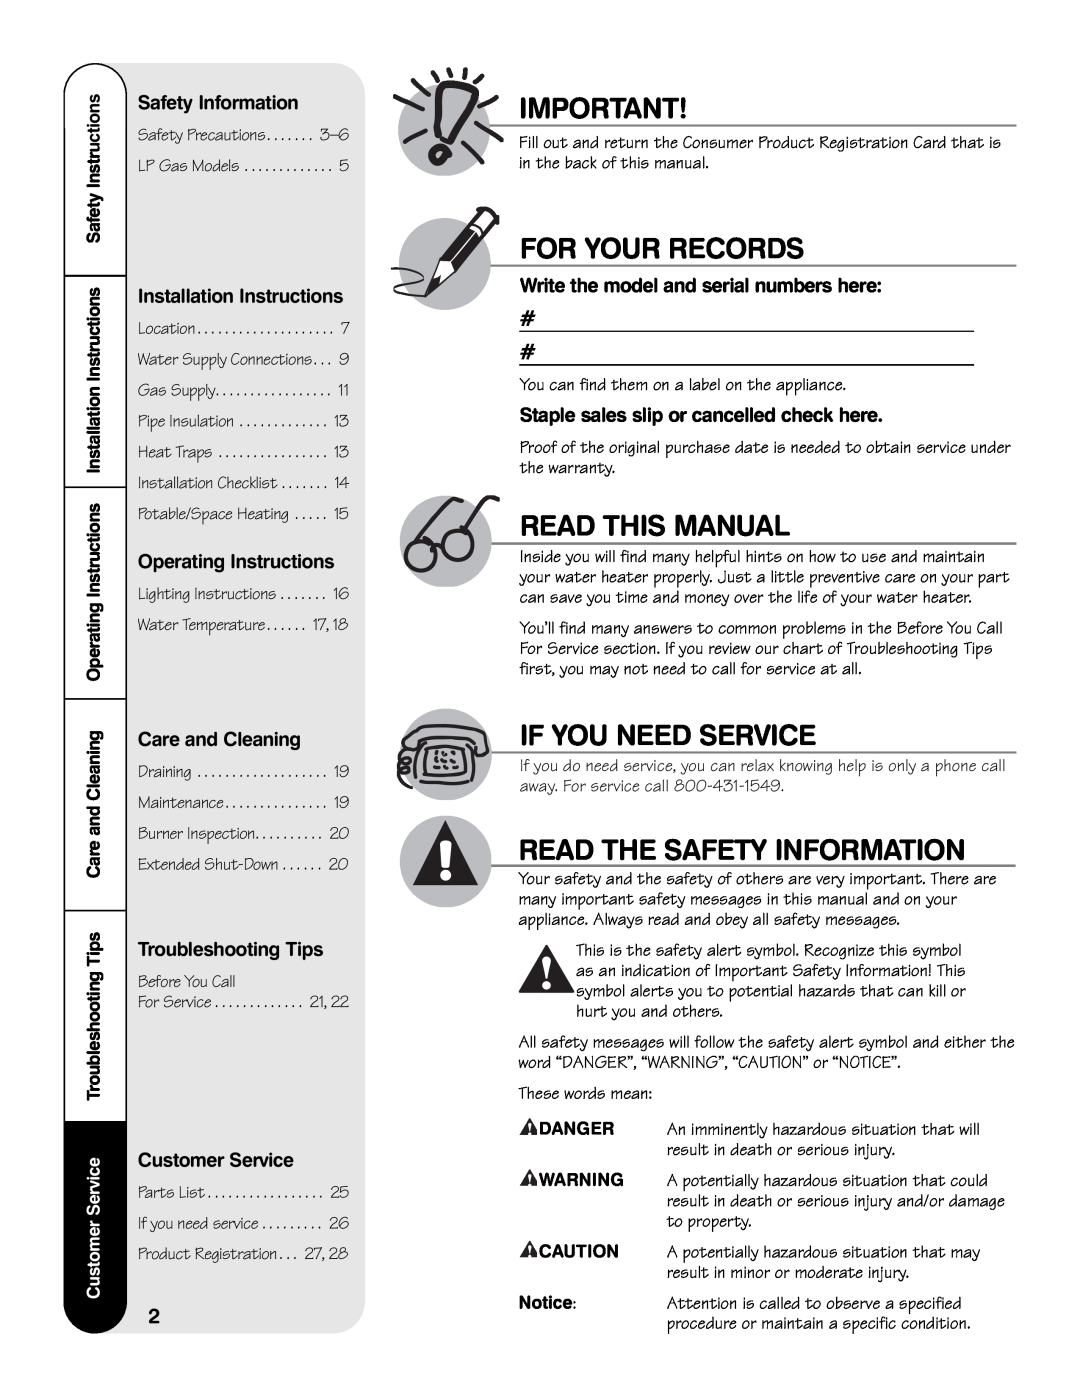 GE PG Series For Your Records, Read This Manual, If You Need Service, Read The Safety Information, Operating Instructions 